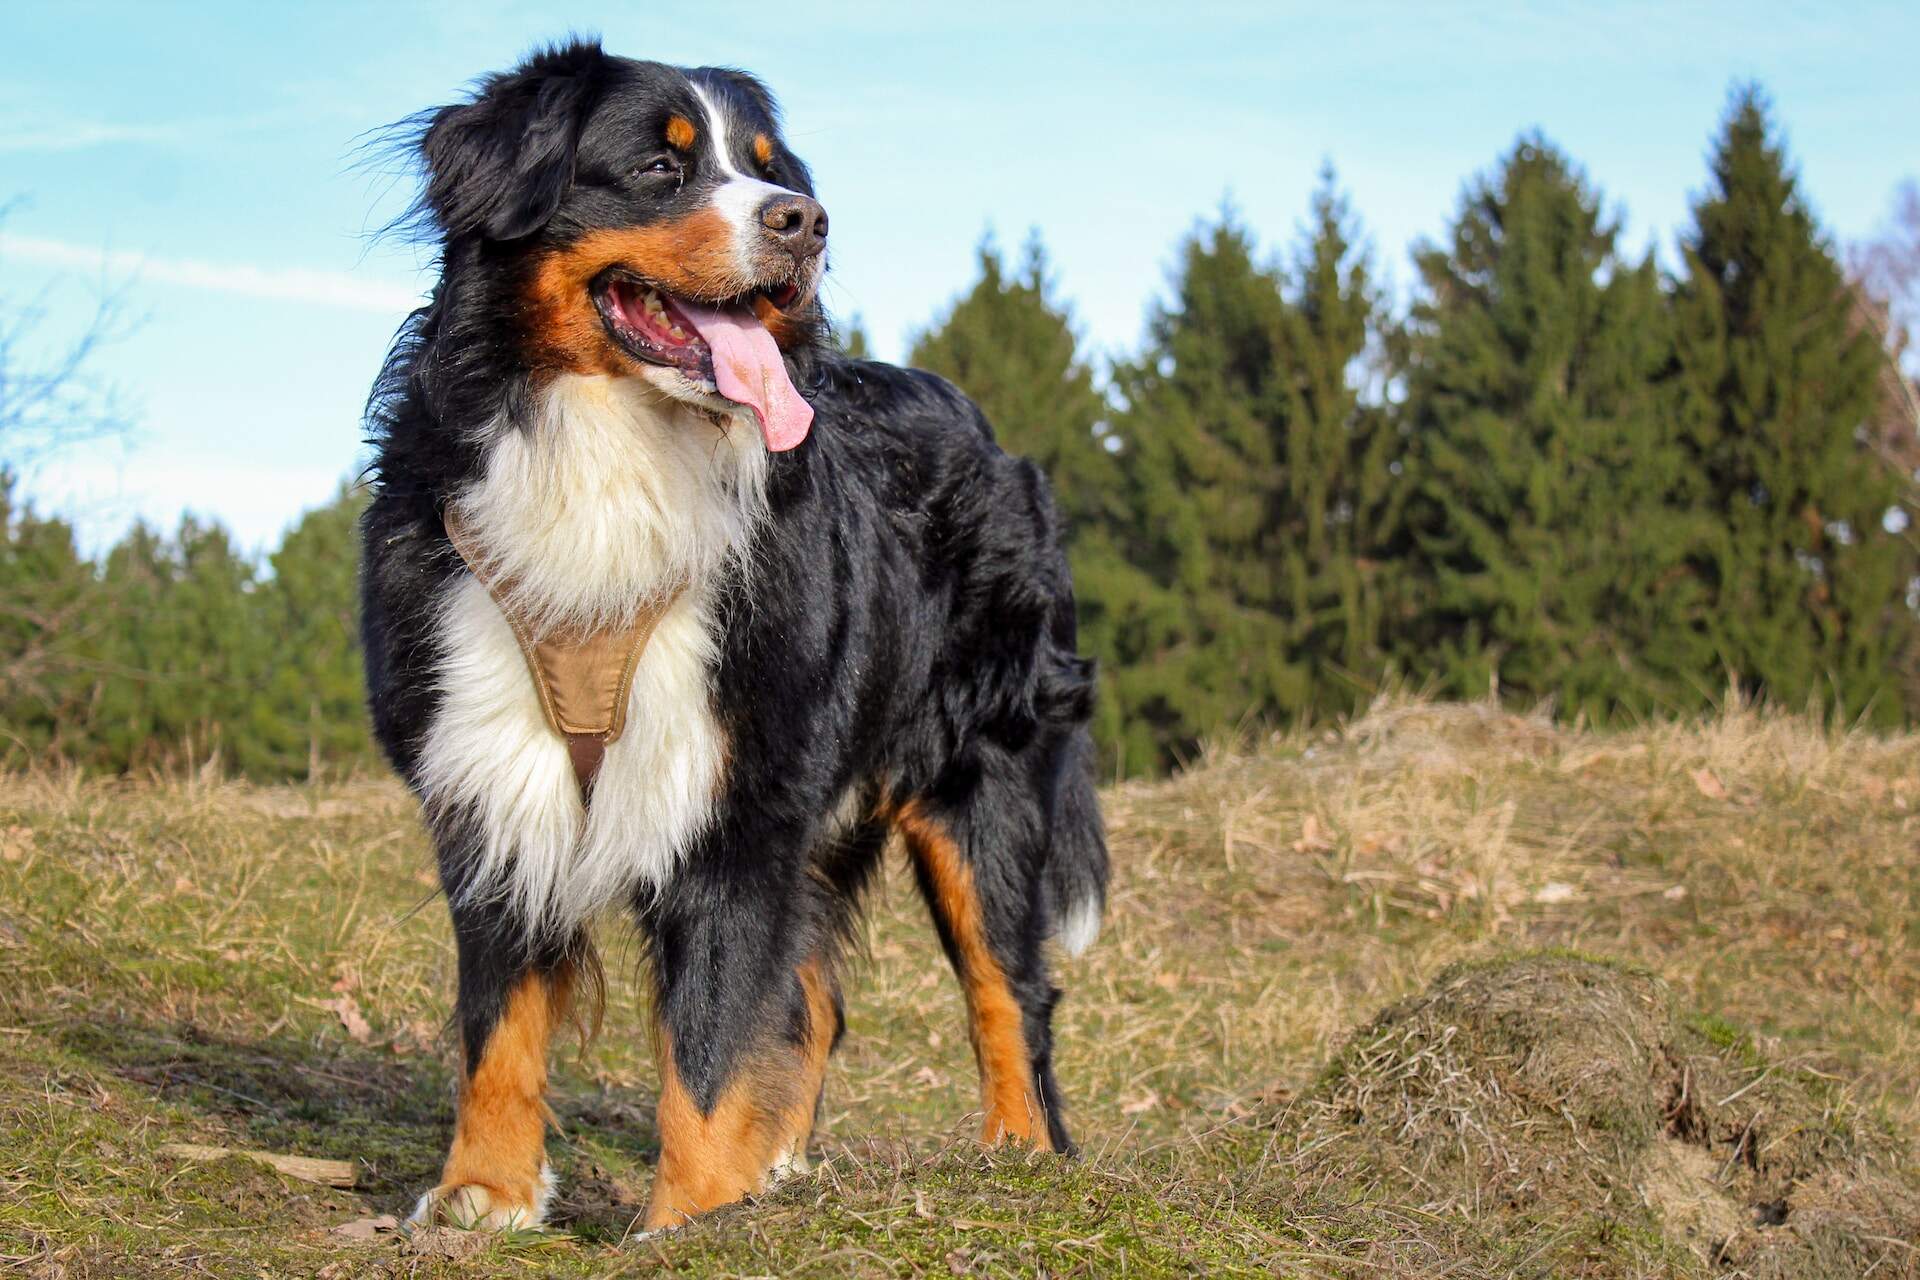 A Bernese mountain dog in a sunny field